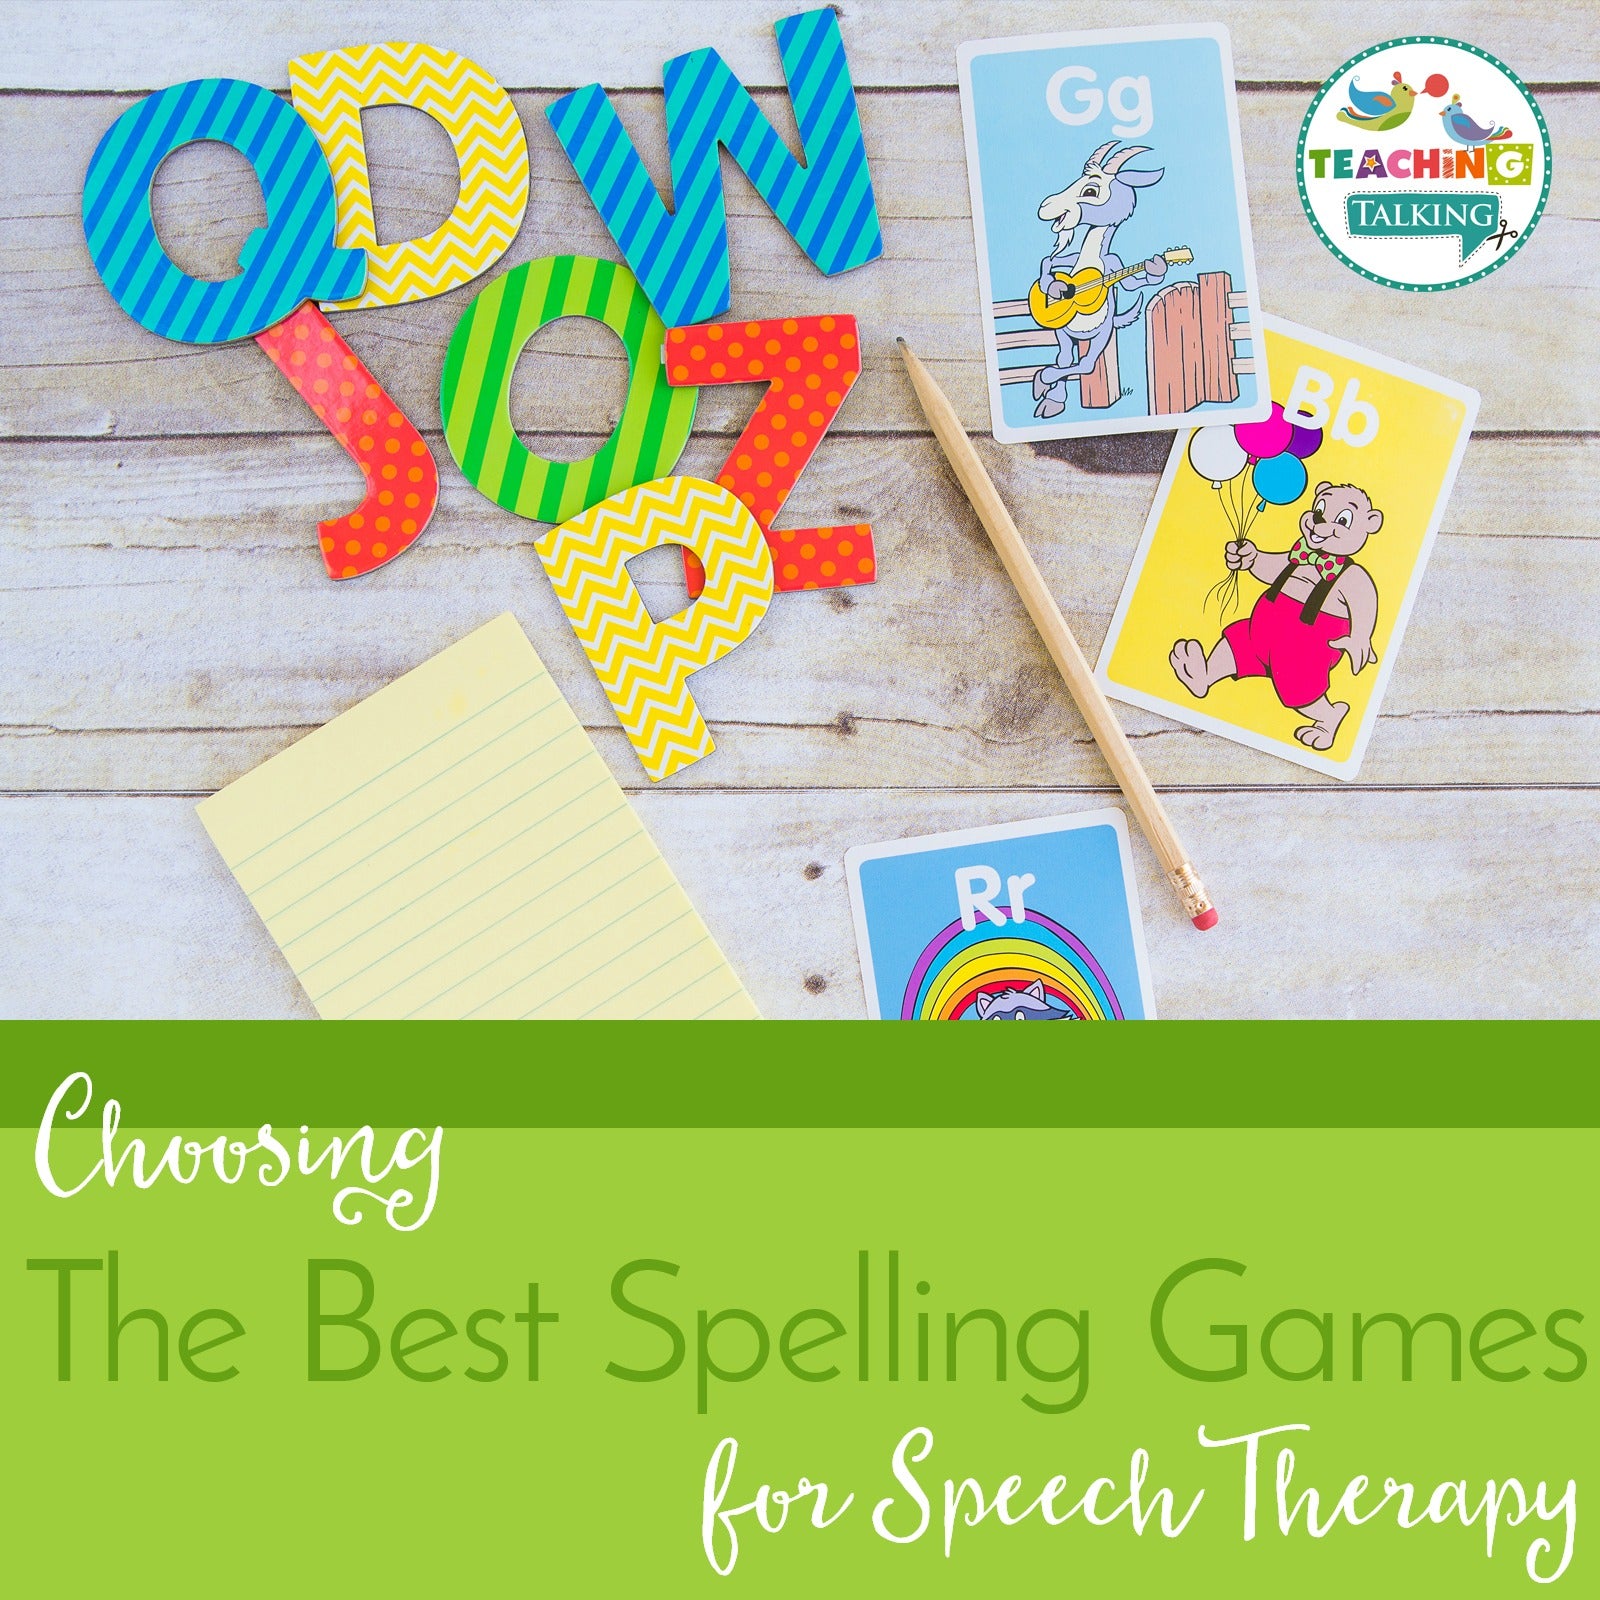 Choosing the best spelling games for speech therapy- square